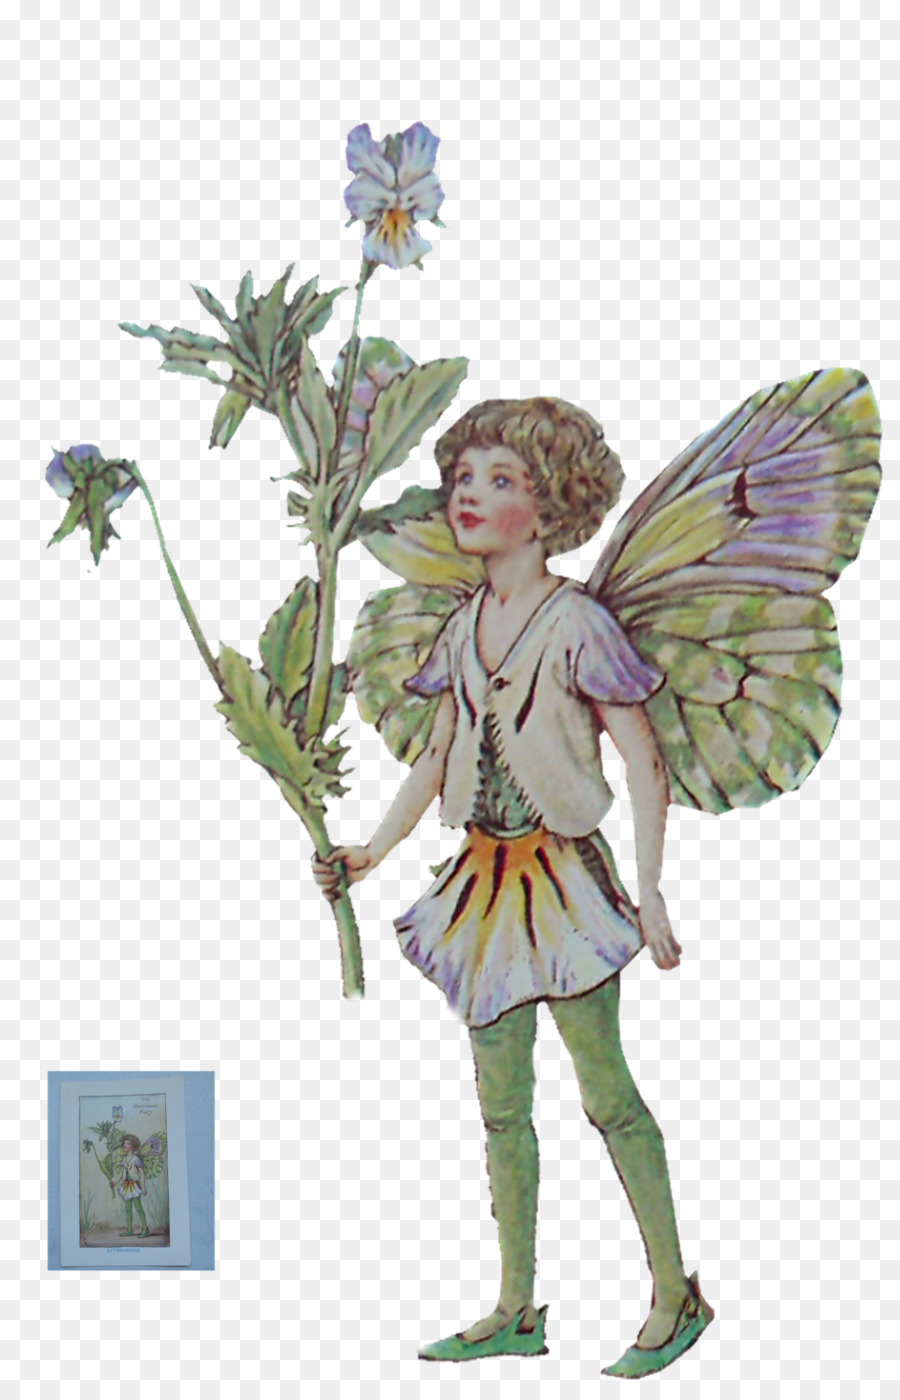 Fairy Flower Fairies DeviantArt Stock photography - Fairy png download - 1024*1573 - Free Transparent Fairy png Download.